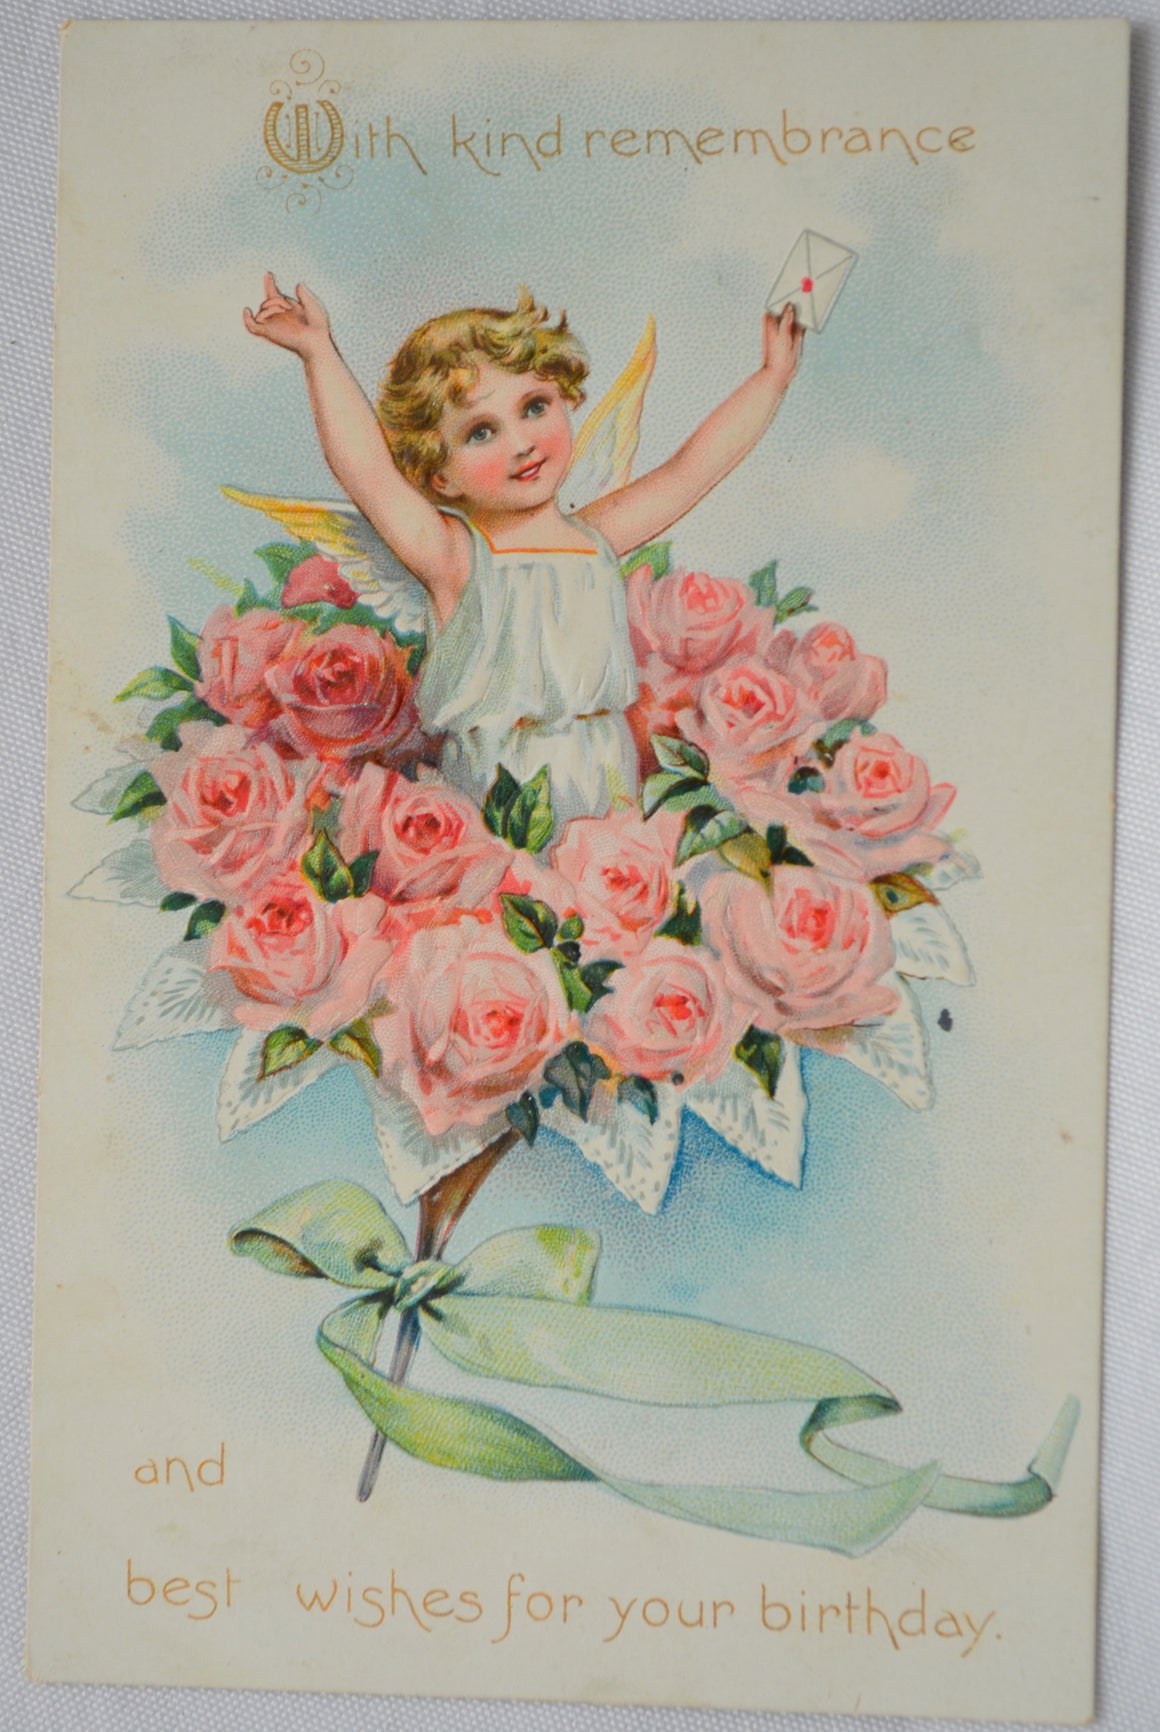 Birthday Wishes Postcard Raphael Tuck Publishing Birthday Post Card Series Angel Child Holding Letter in Bouquet of Flowers